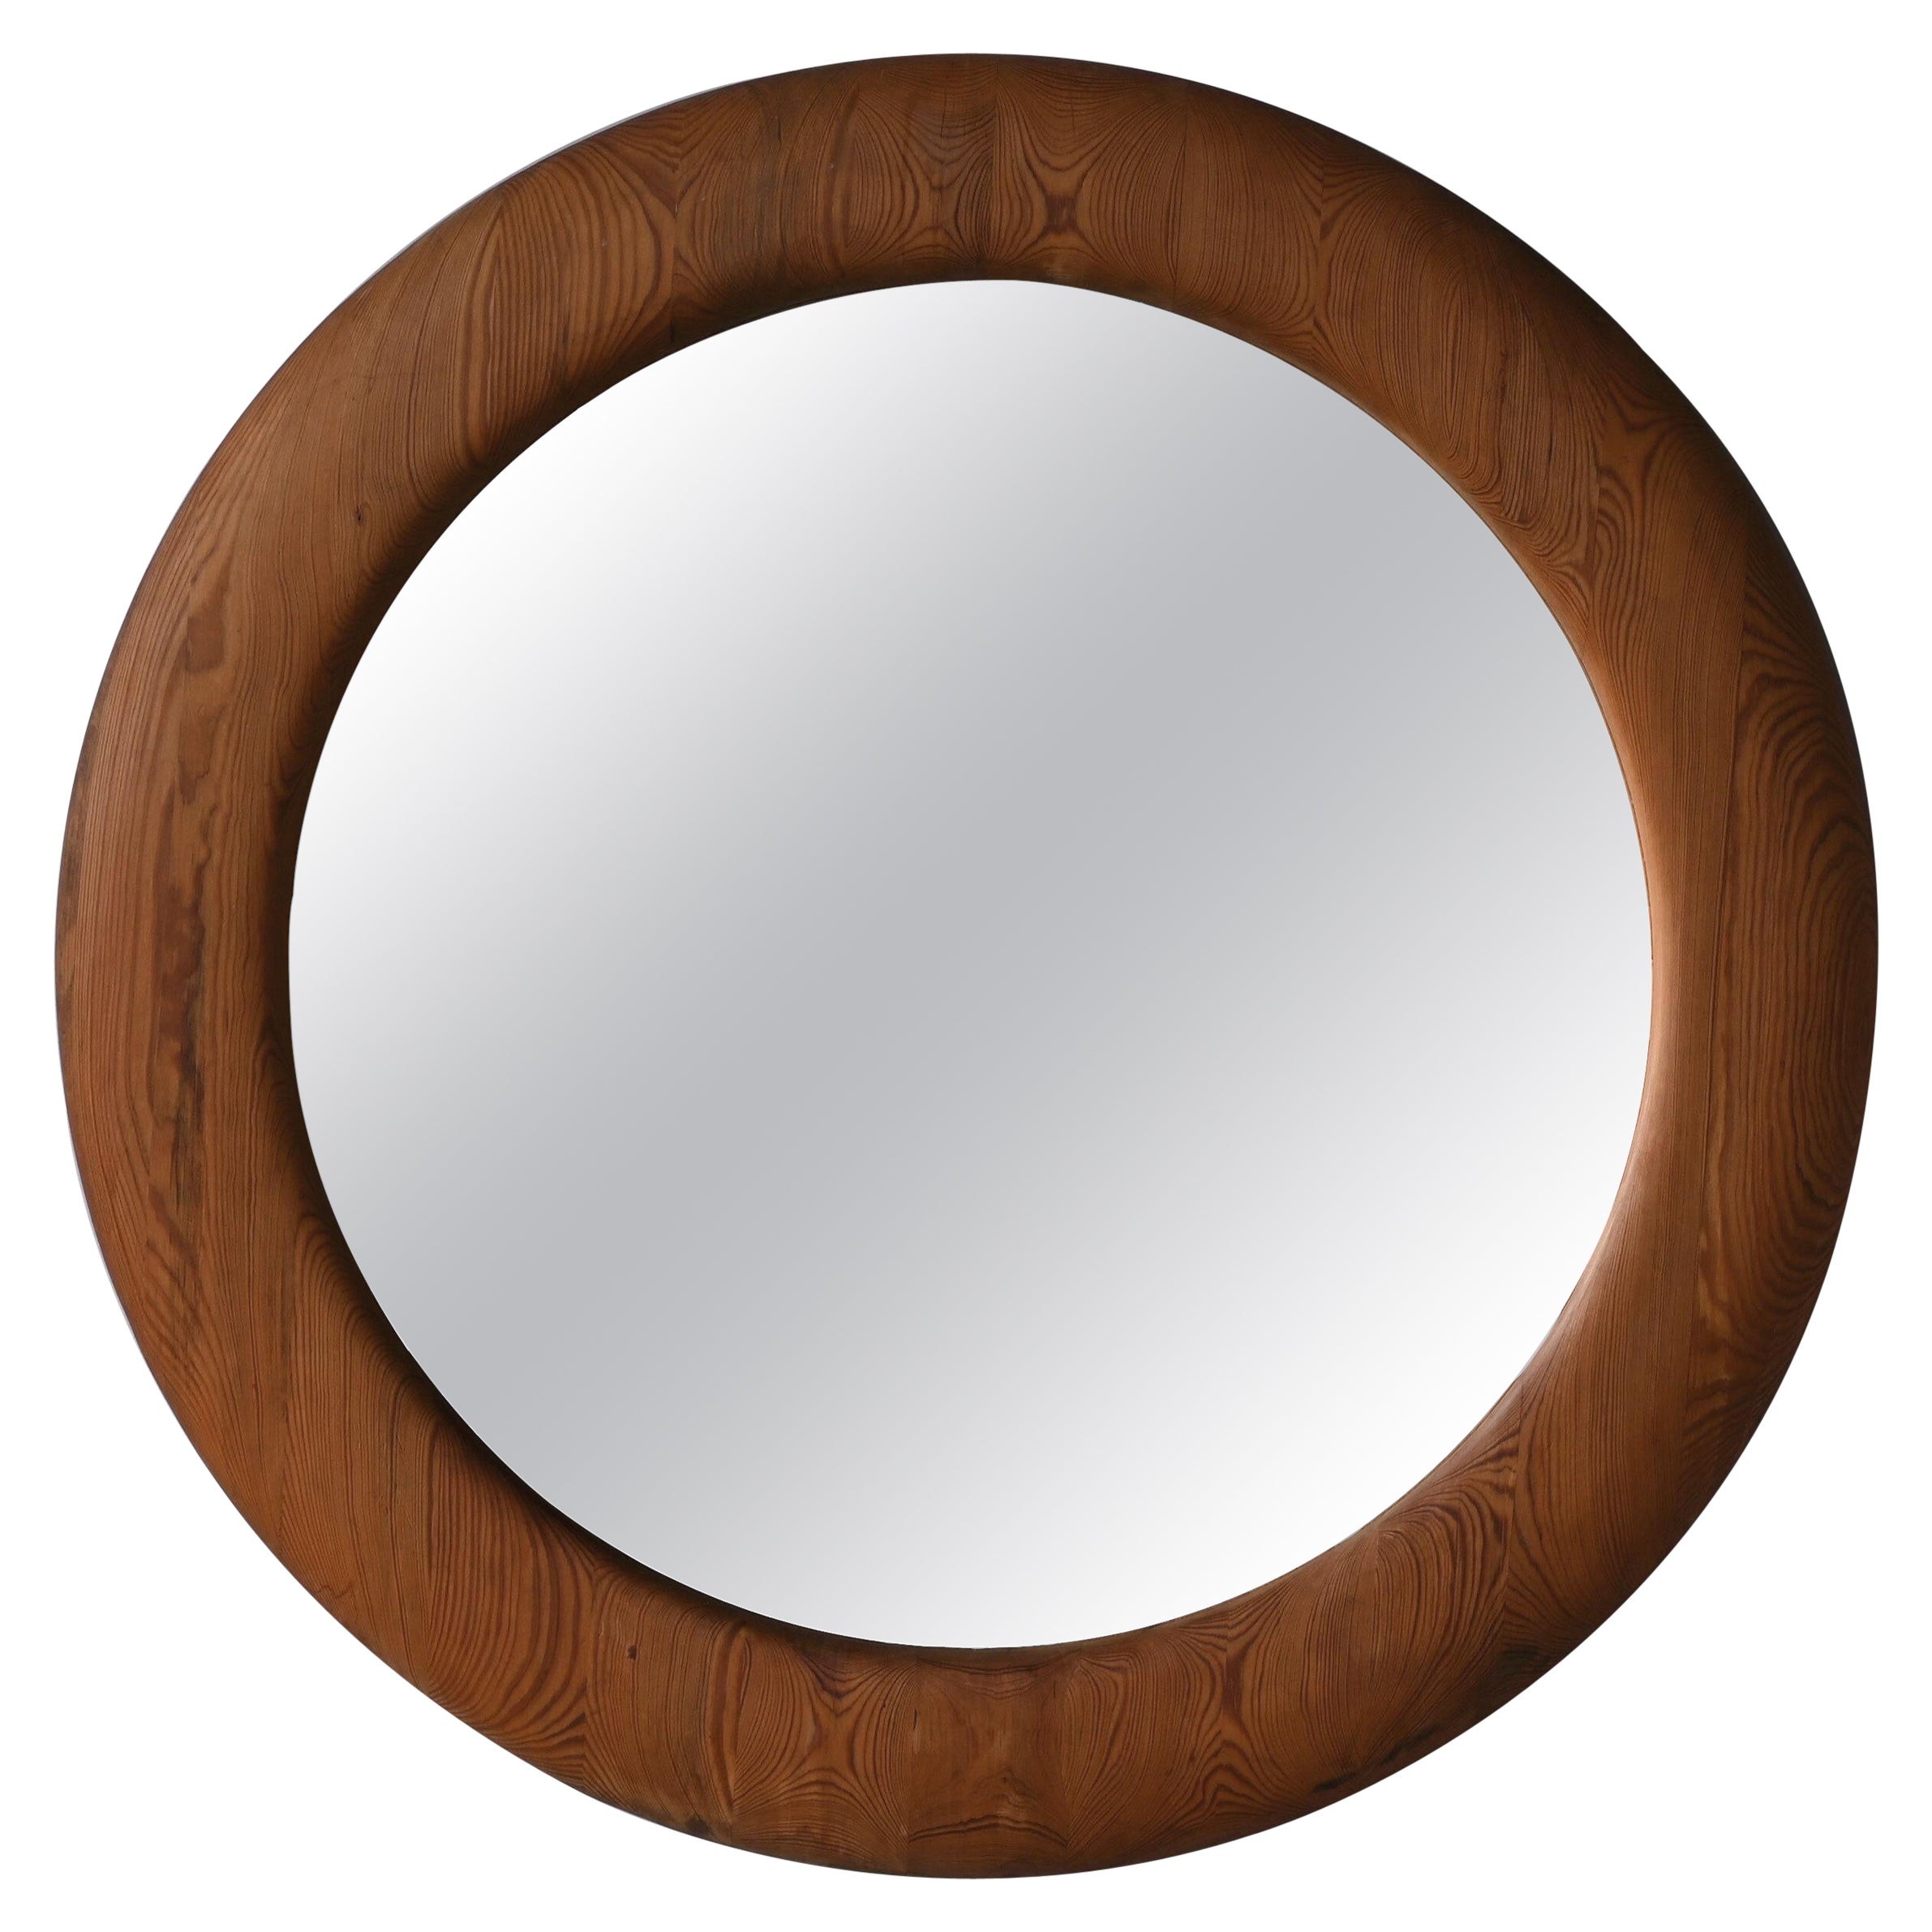 Sven Larsson, Large Wall Mirror, Solid Pine, Artist's Studio, Sweden, 1970s For Sale